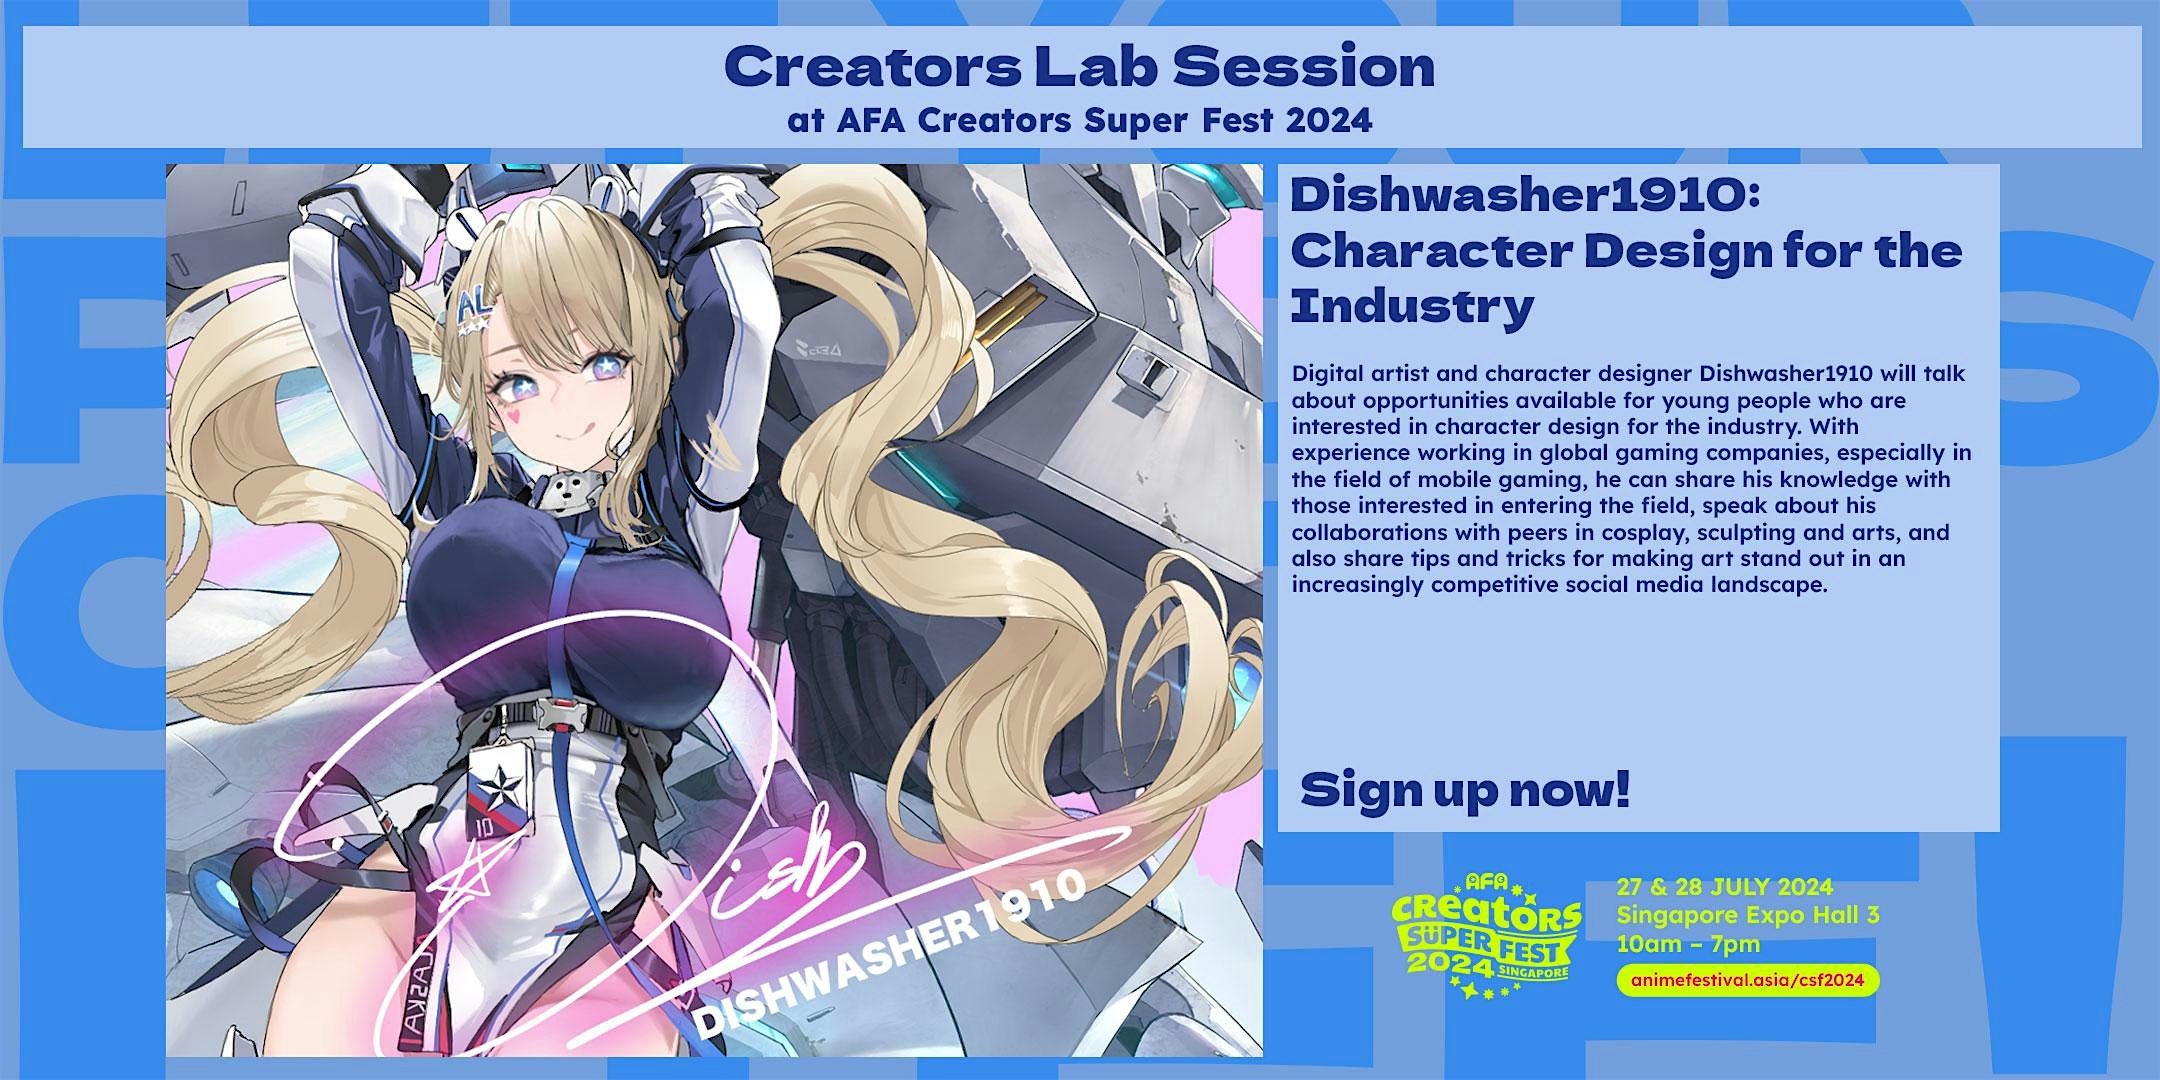 Character Design for the Gaming Industry with Dishwasher1910